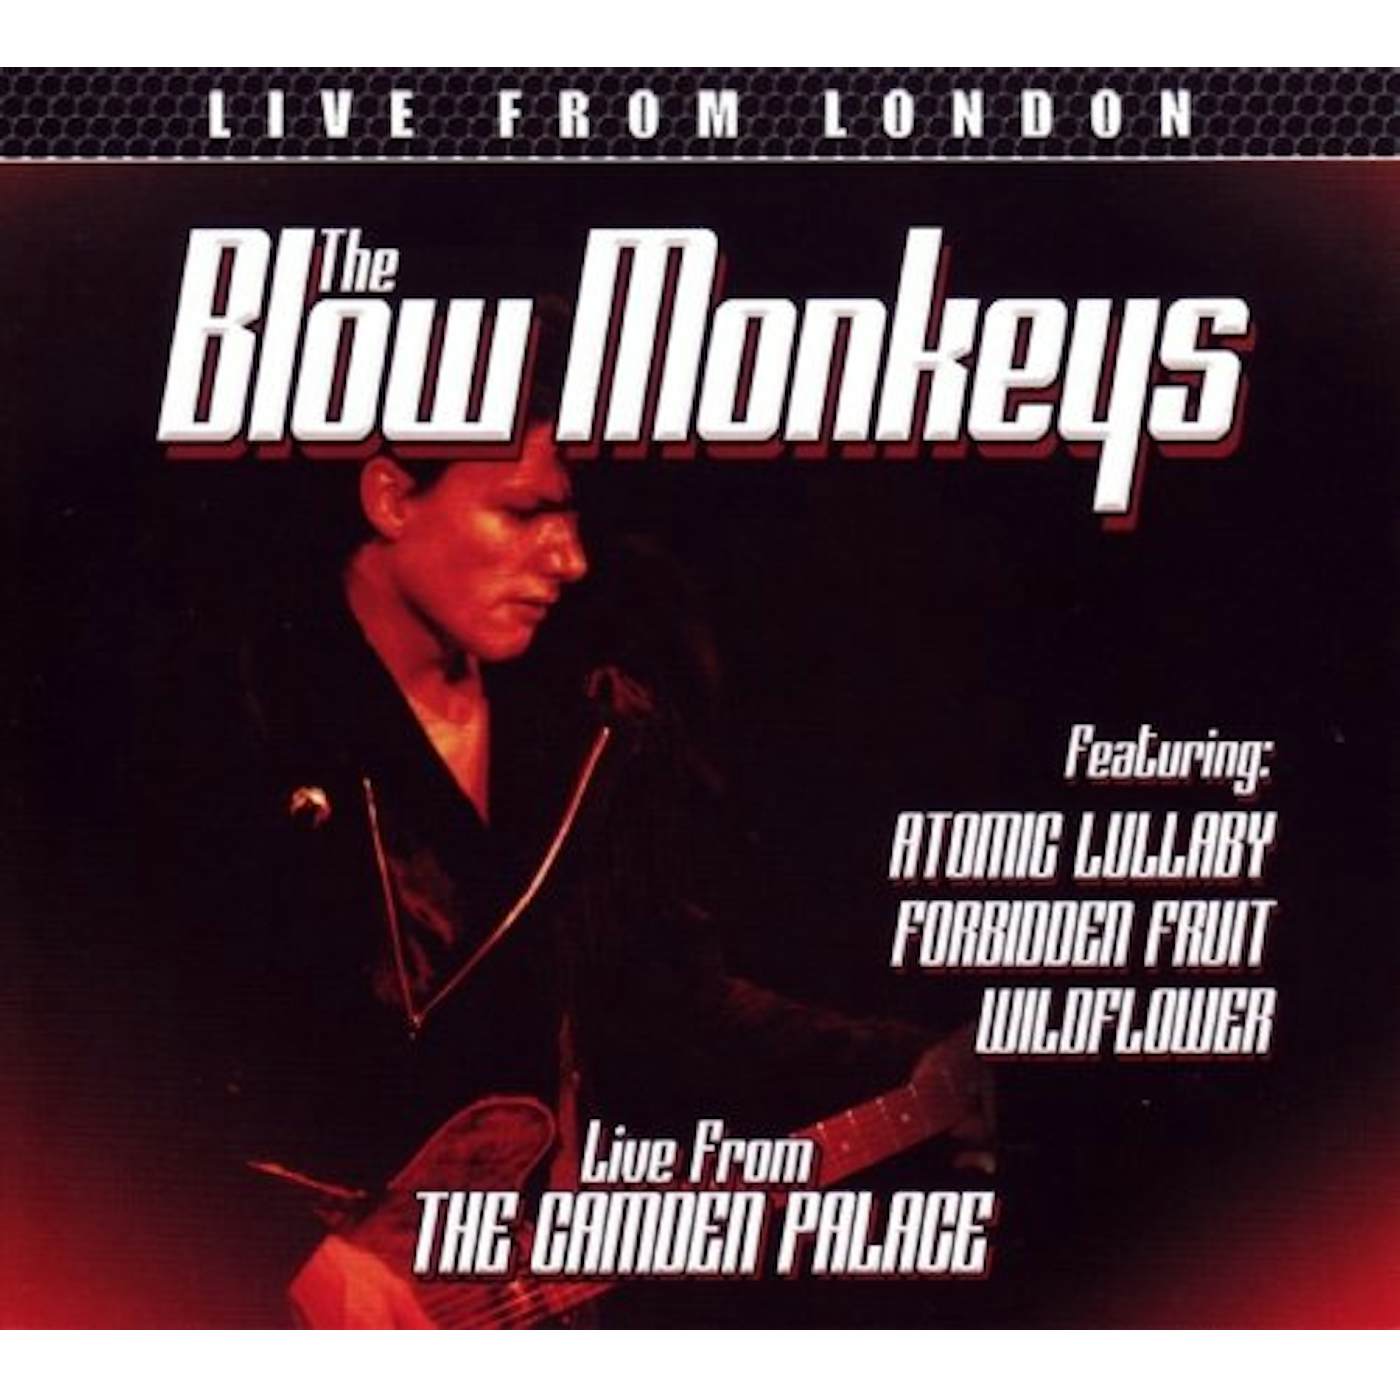 The Blow Monkeys LIVE FROM LONDON CD